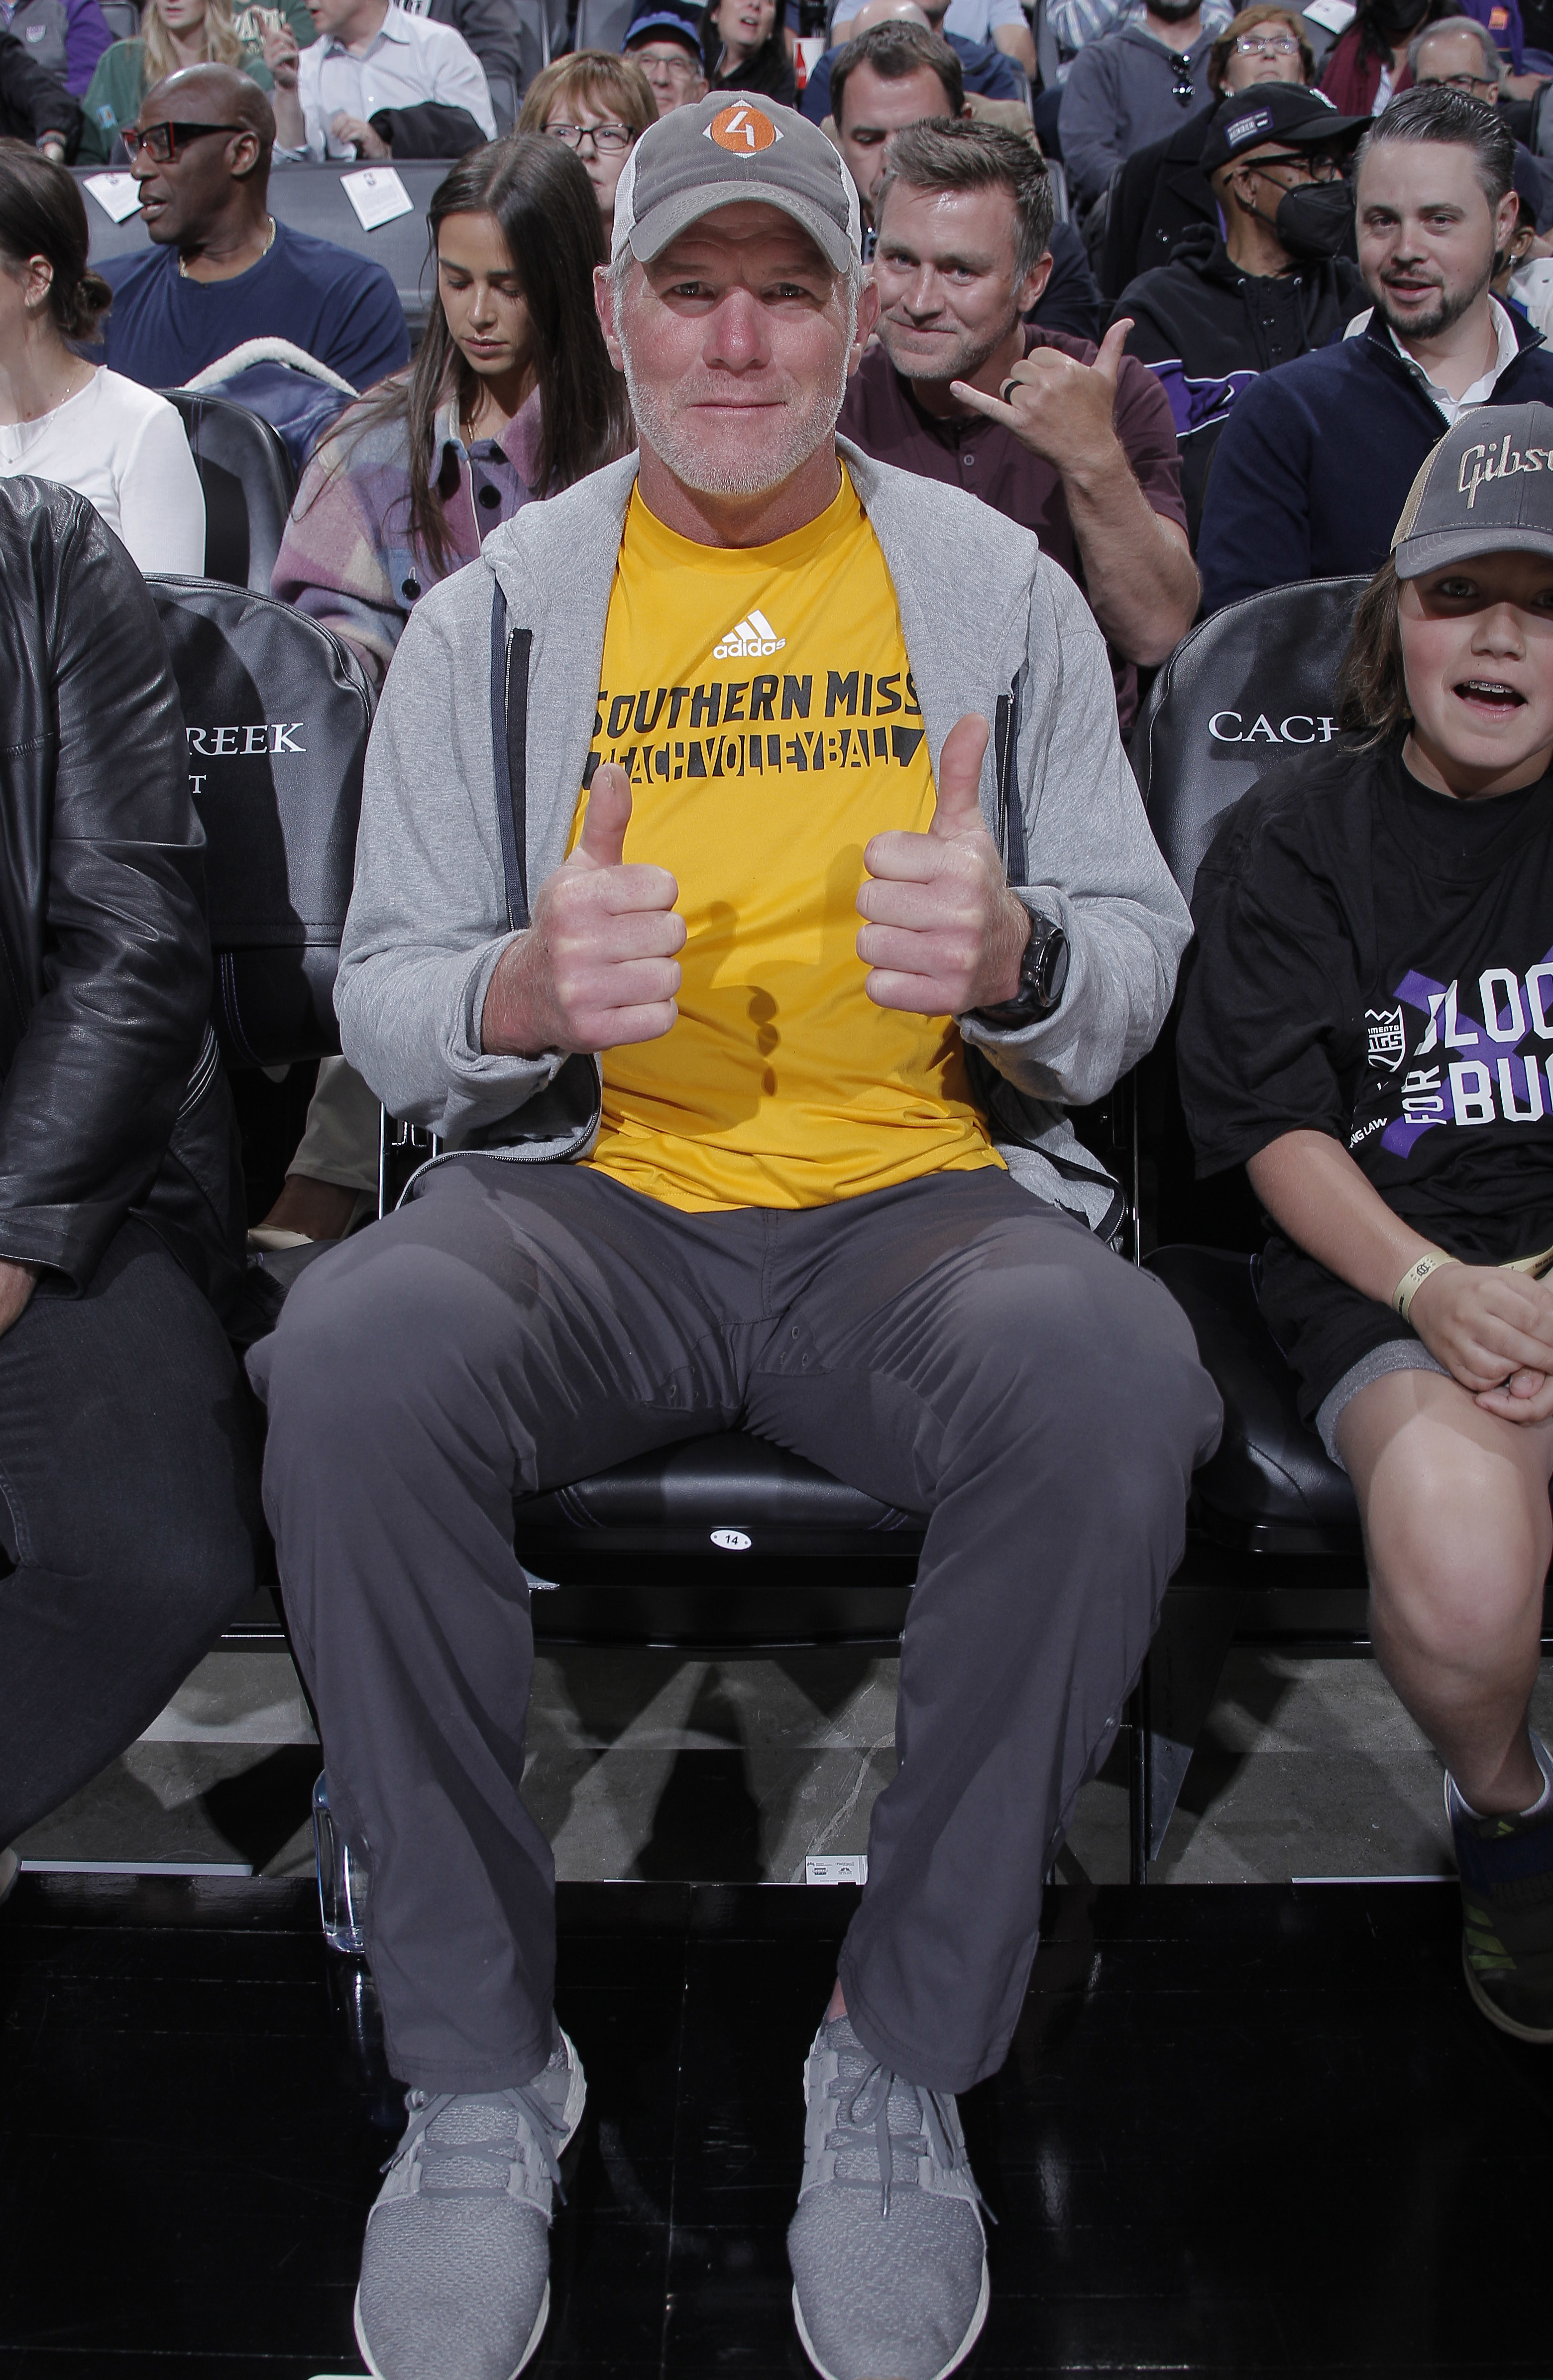 Brett in a Southern Miss T-shirt and cap sitting with thumbs up at an event